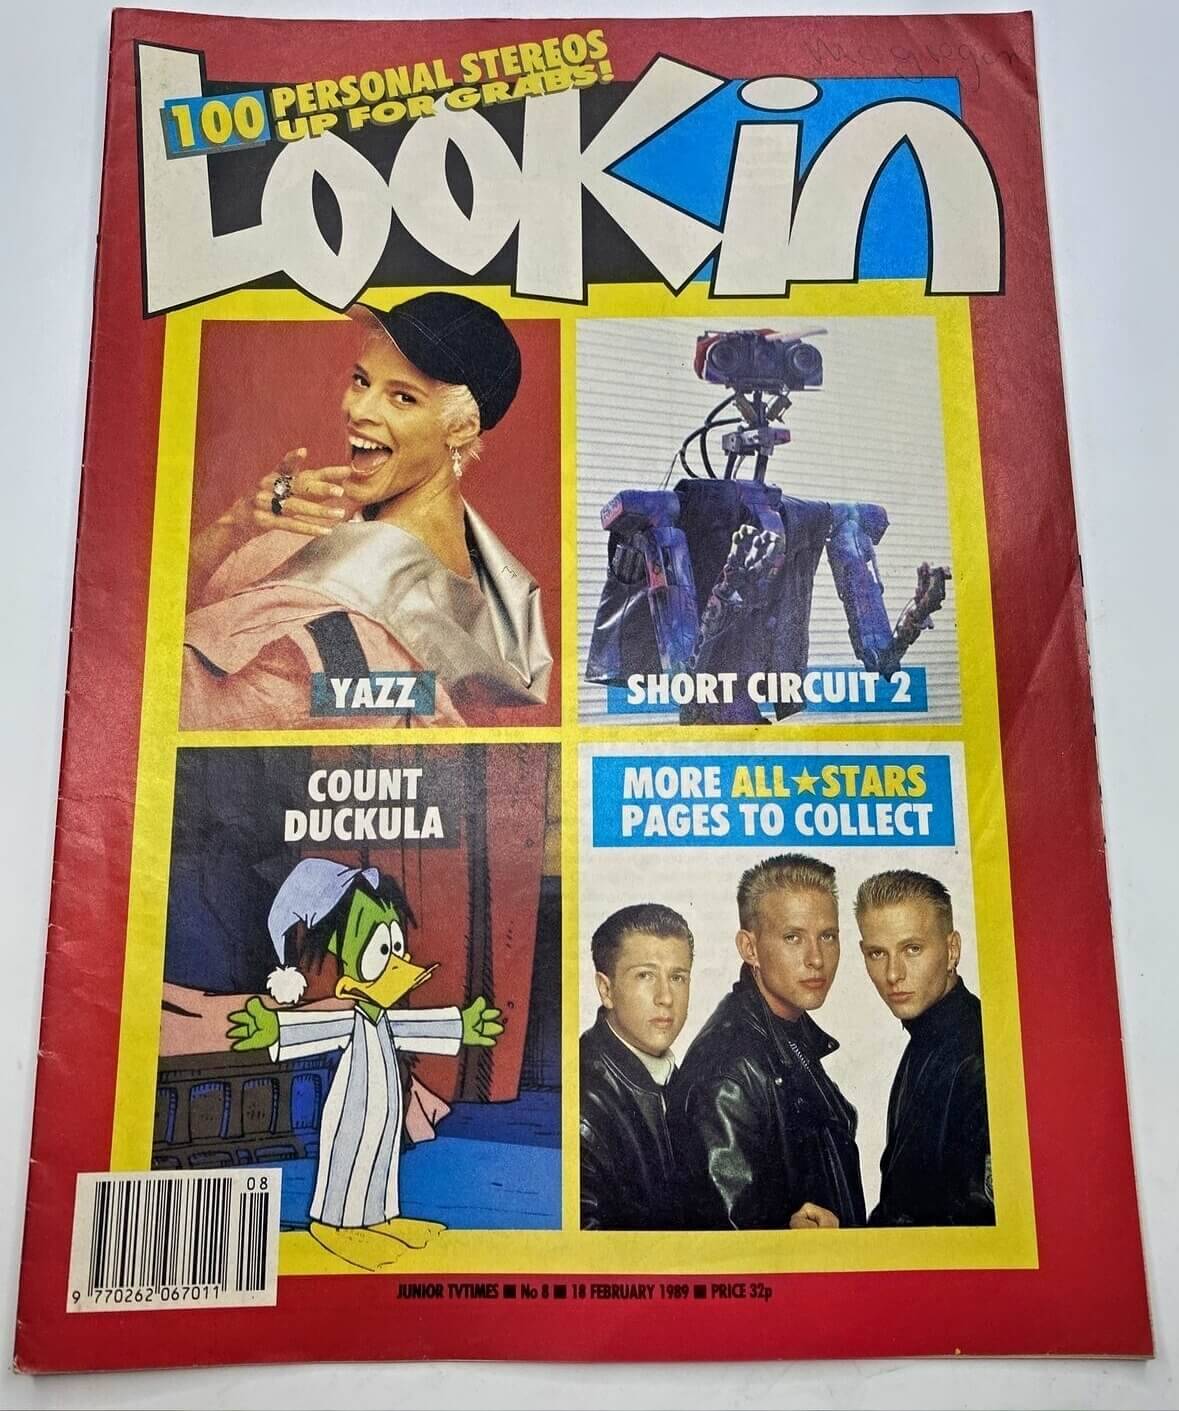 <p>Look-In magazine from 18 February 1989 featuring Yazz, Short Circuit 2, Count Duckula and Bros.</p>